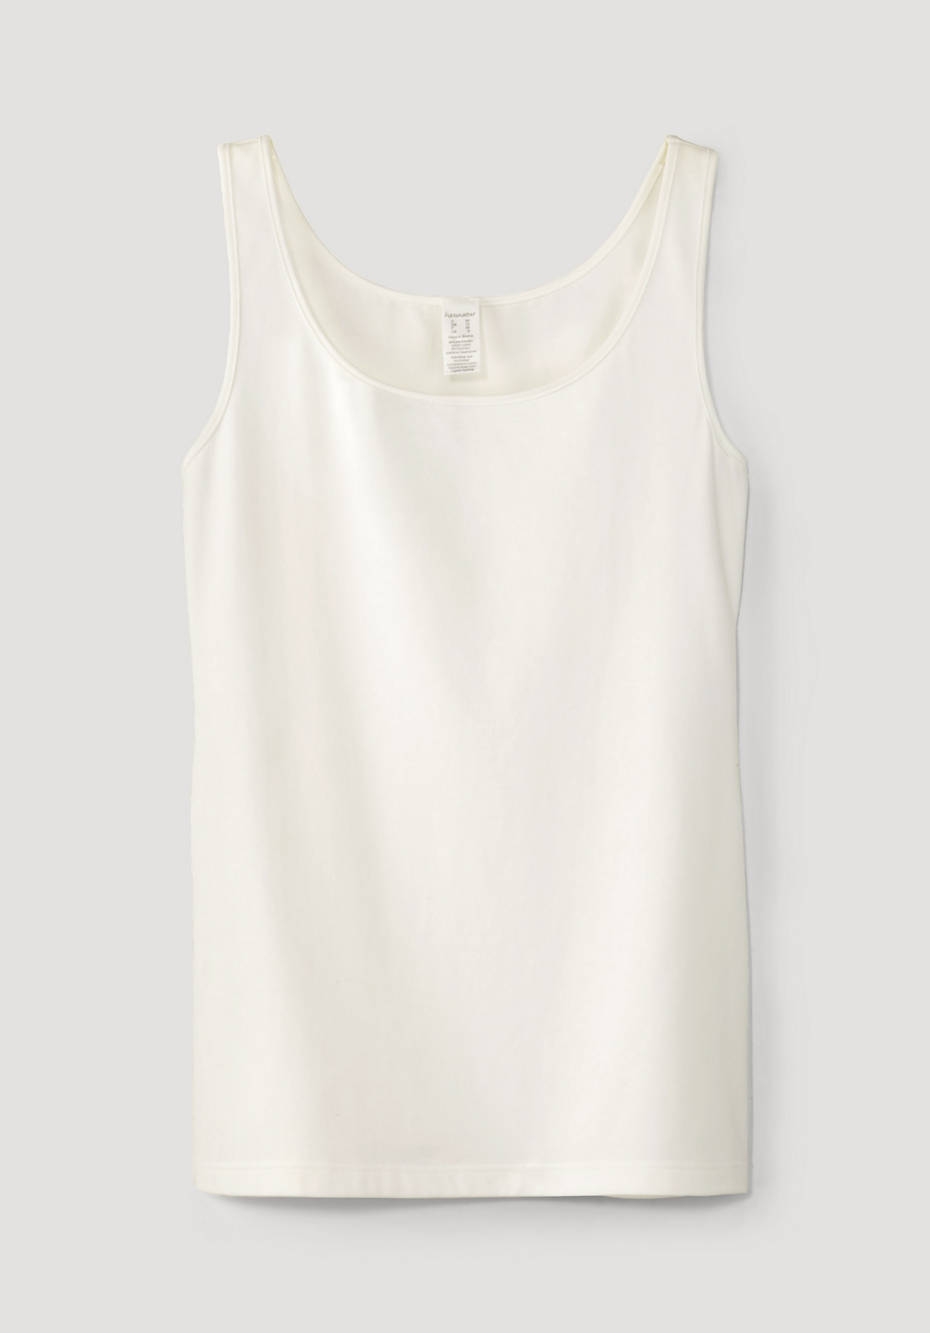 Tank top PureLUX made from organic cotton